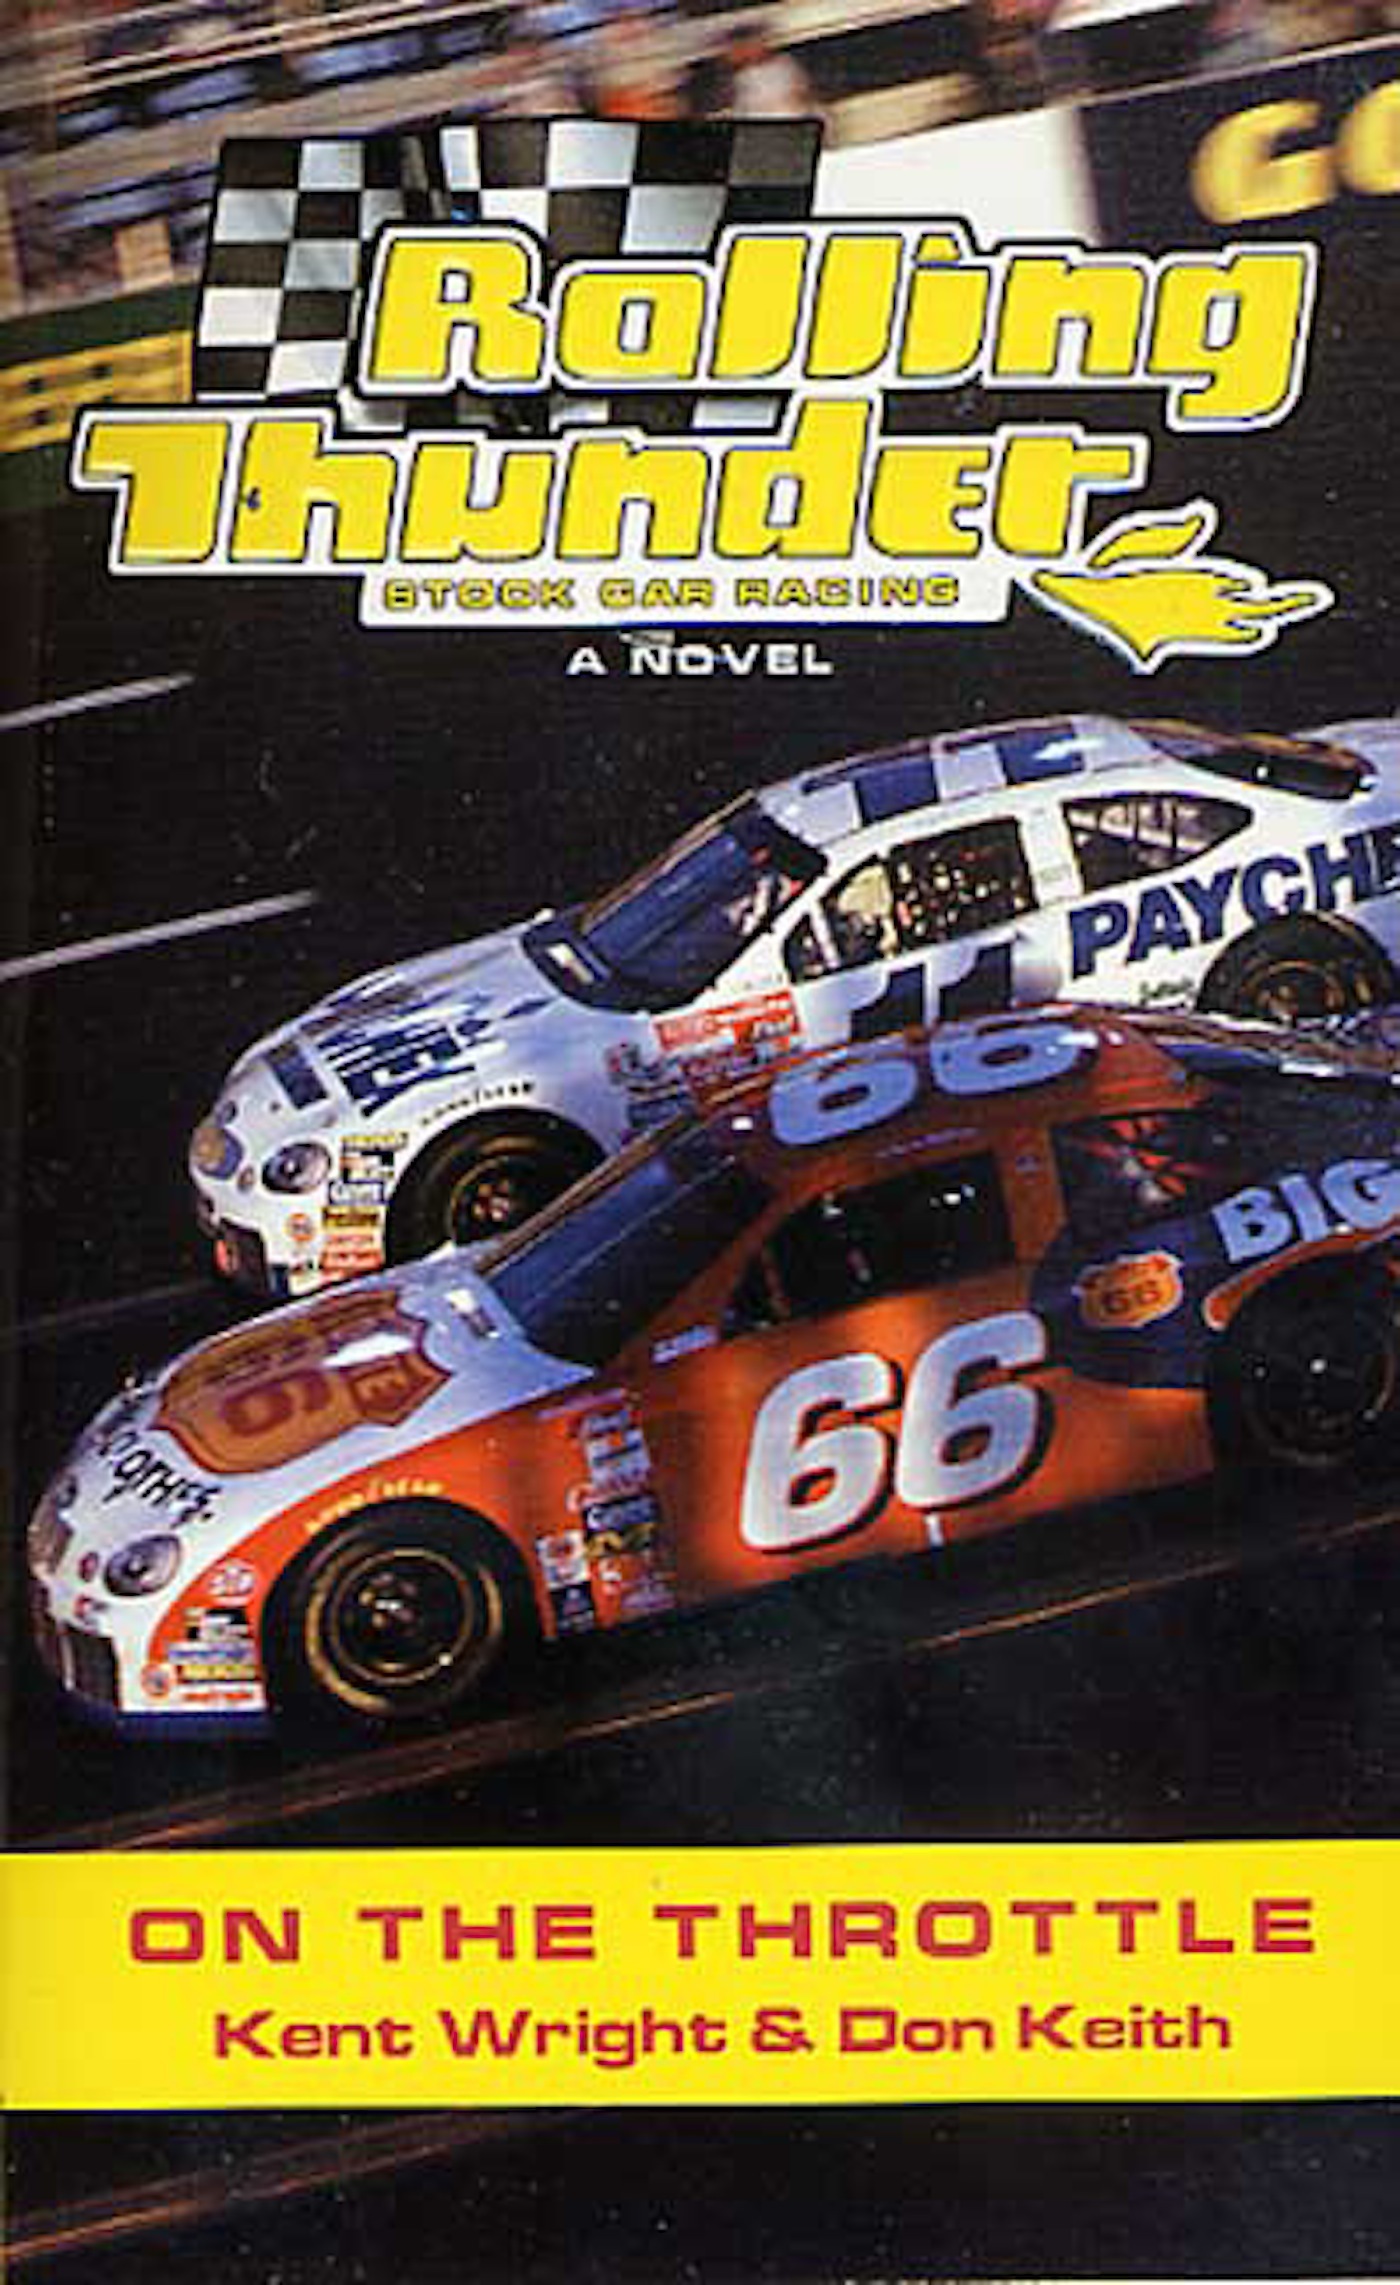 Rolling Thunder Stock Car Racing: On The Throttle : A Novel by Kent Wright, Don Keith